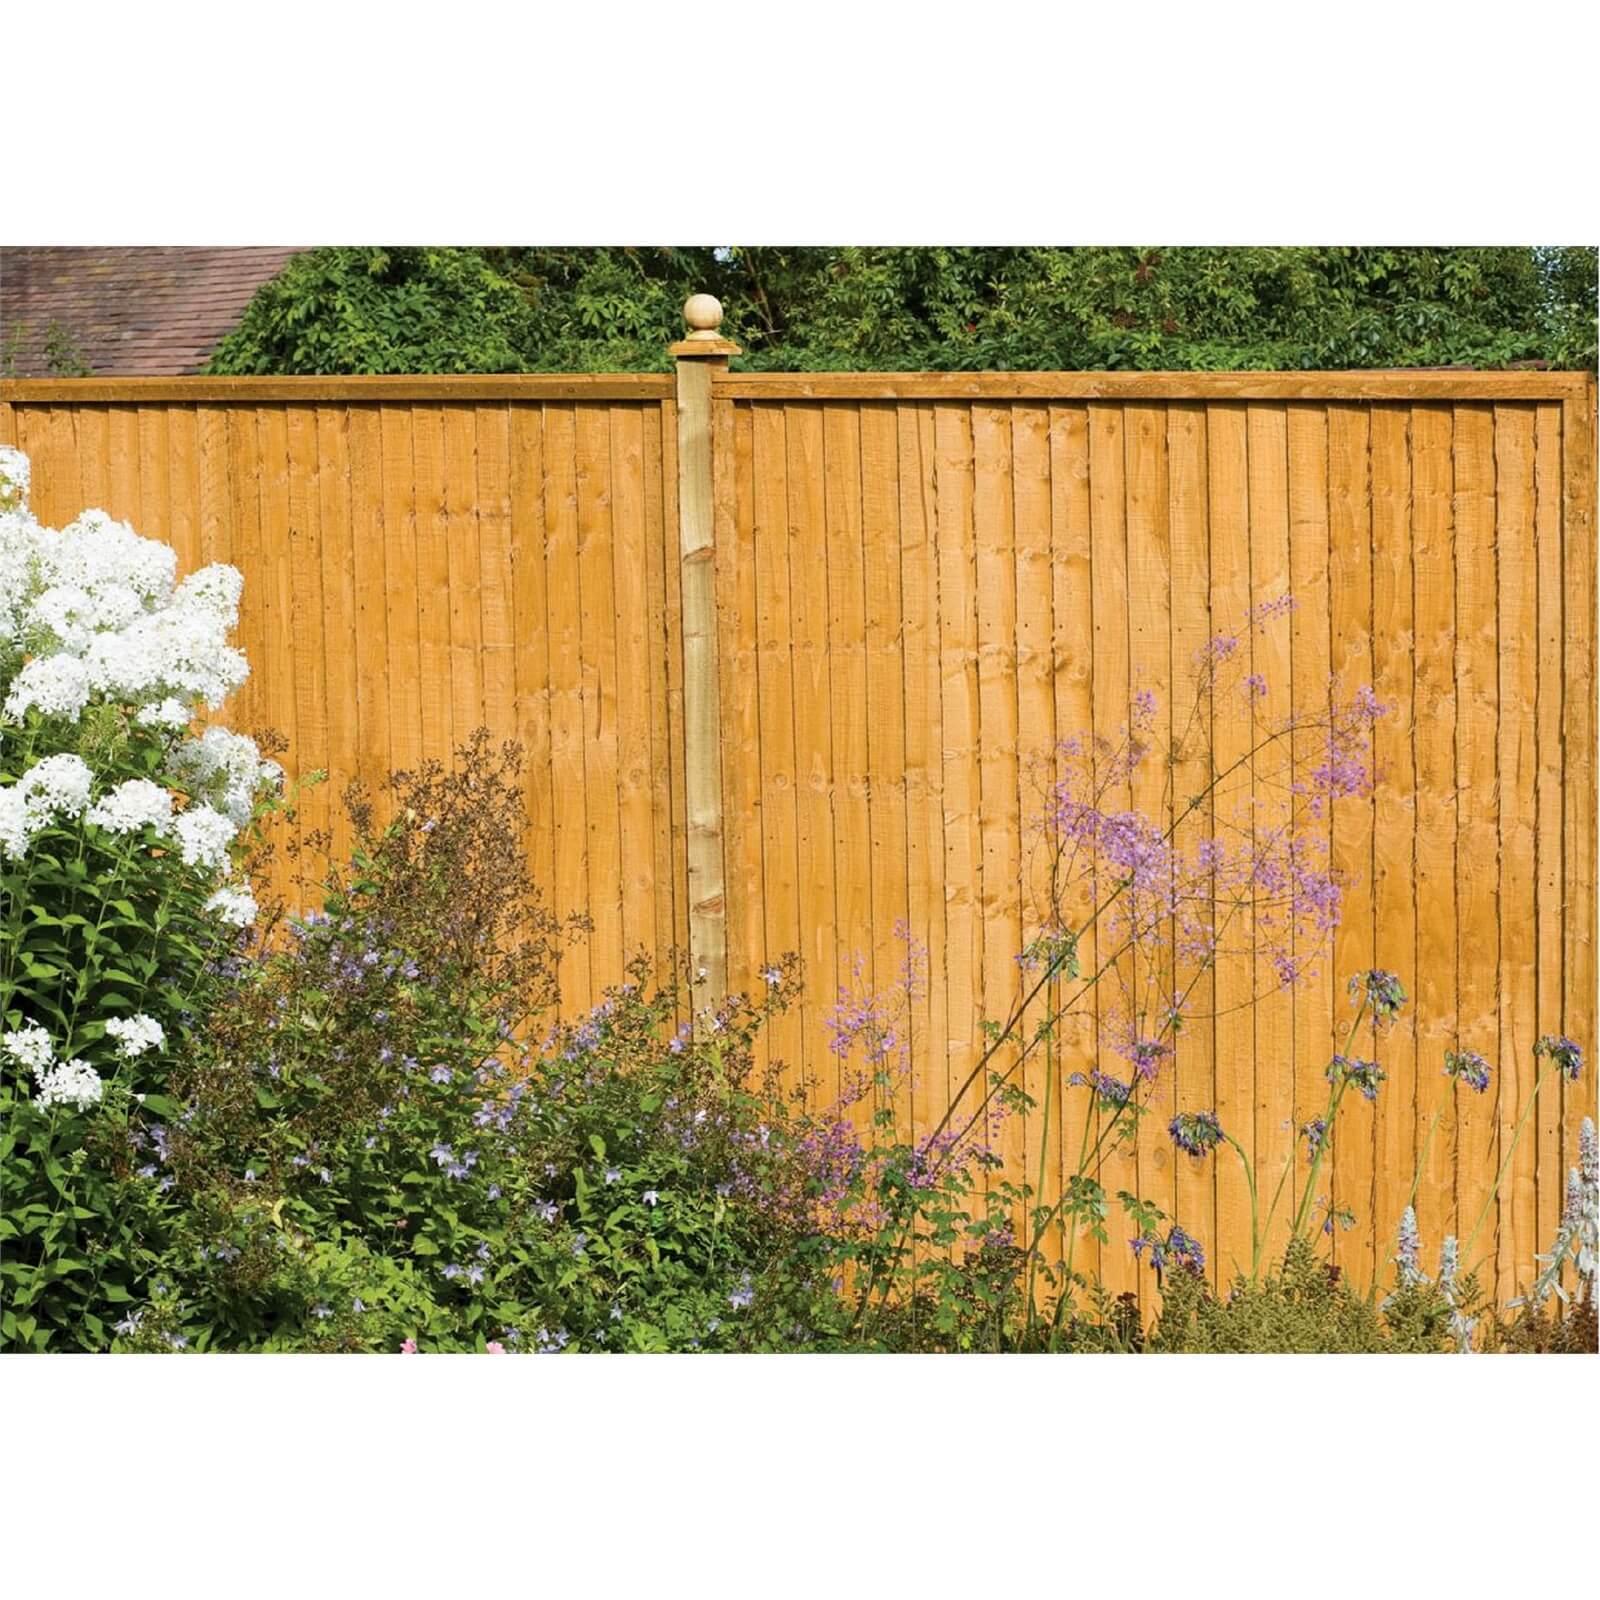 Forest Larchlap Closeboard 1.5m Fence Panel - Pack of 4